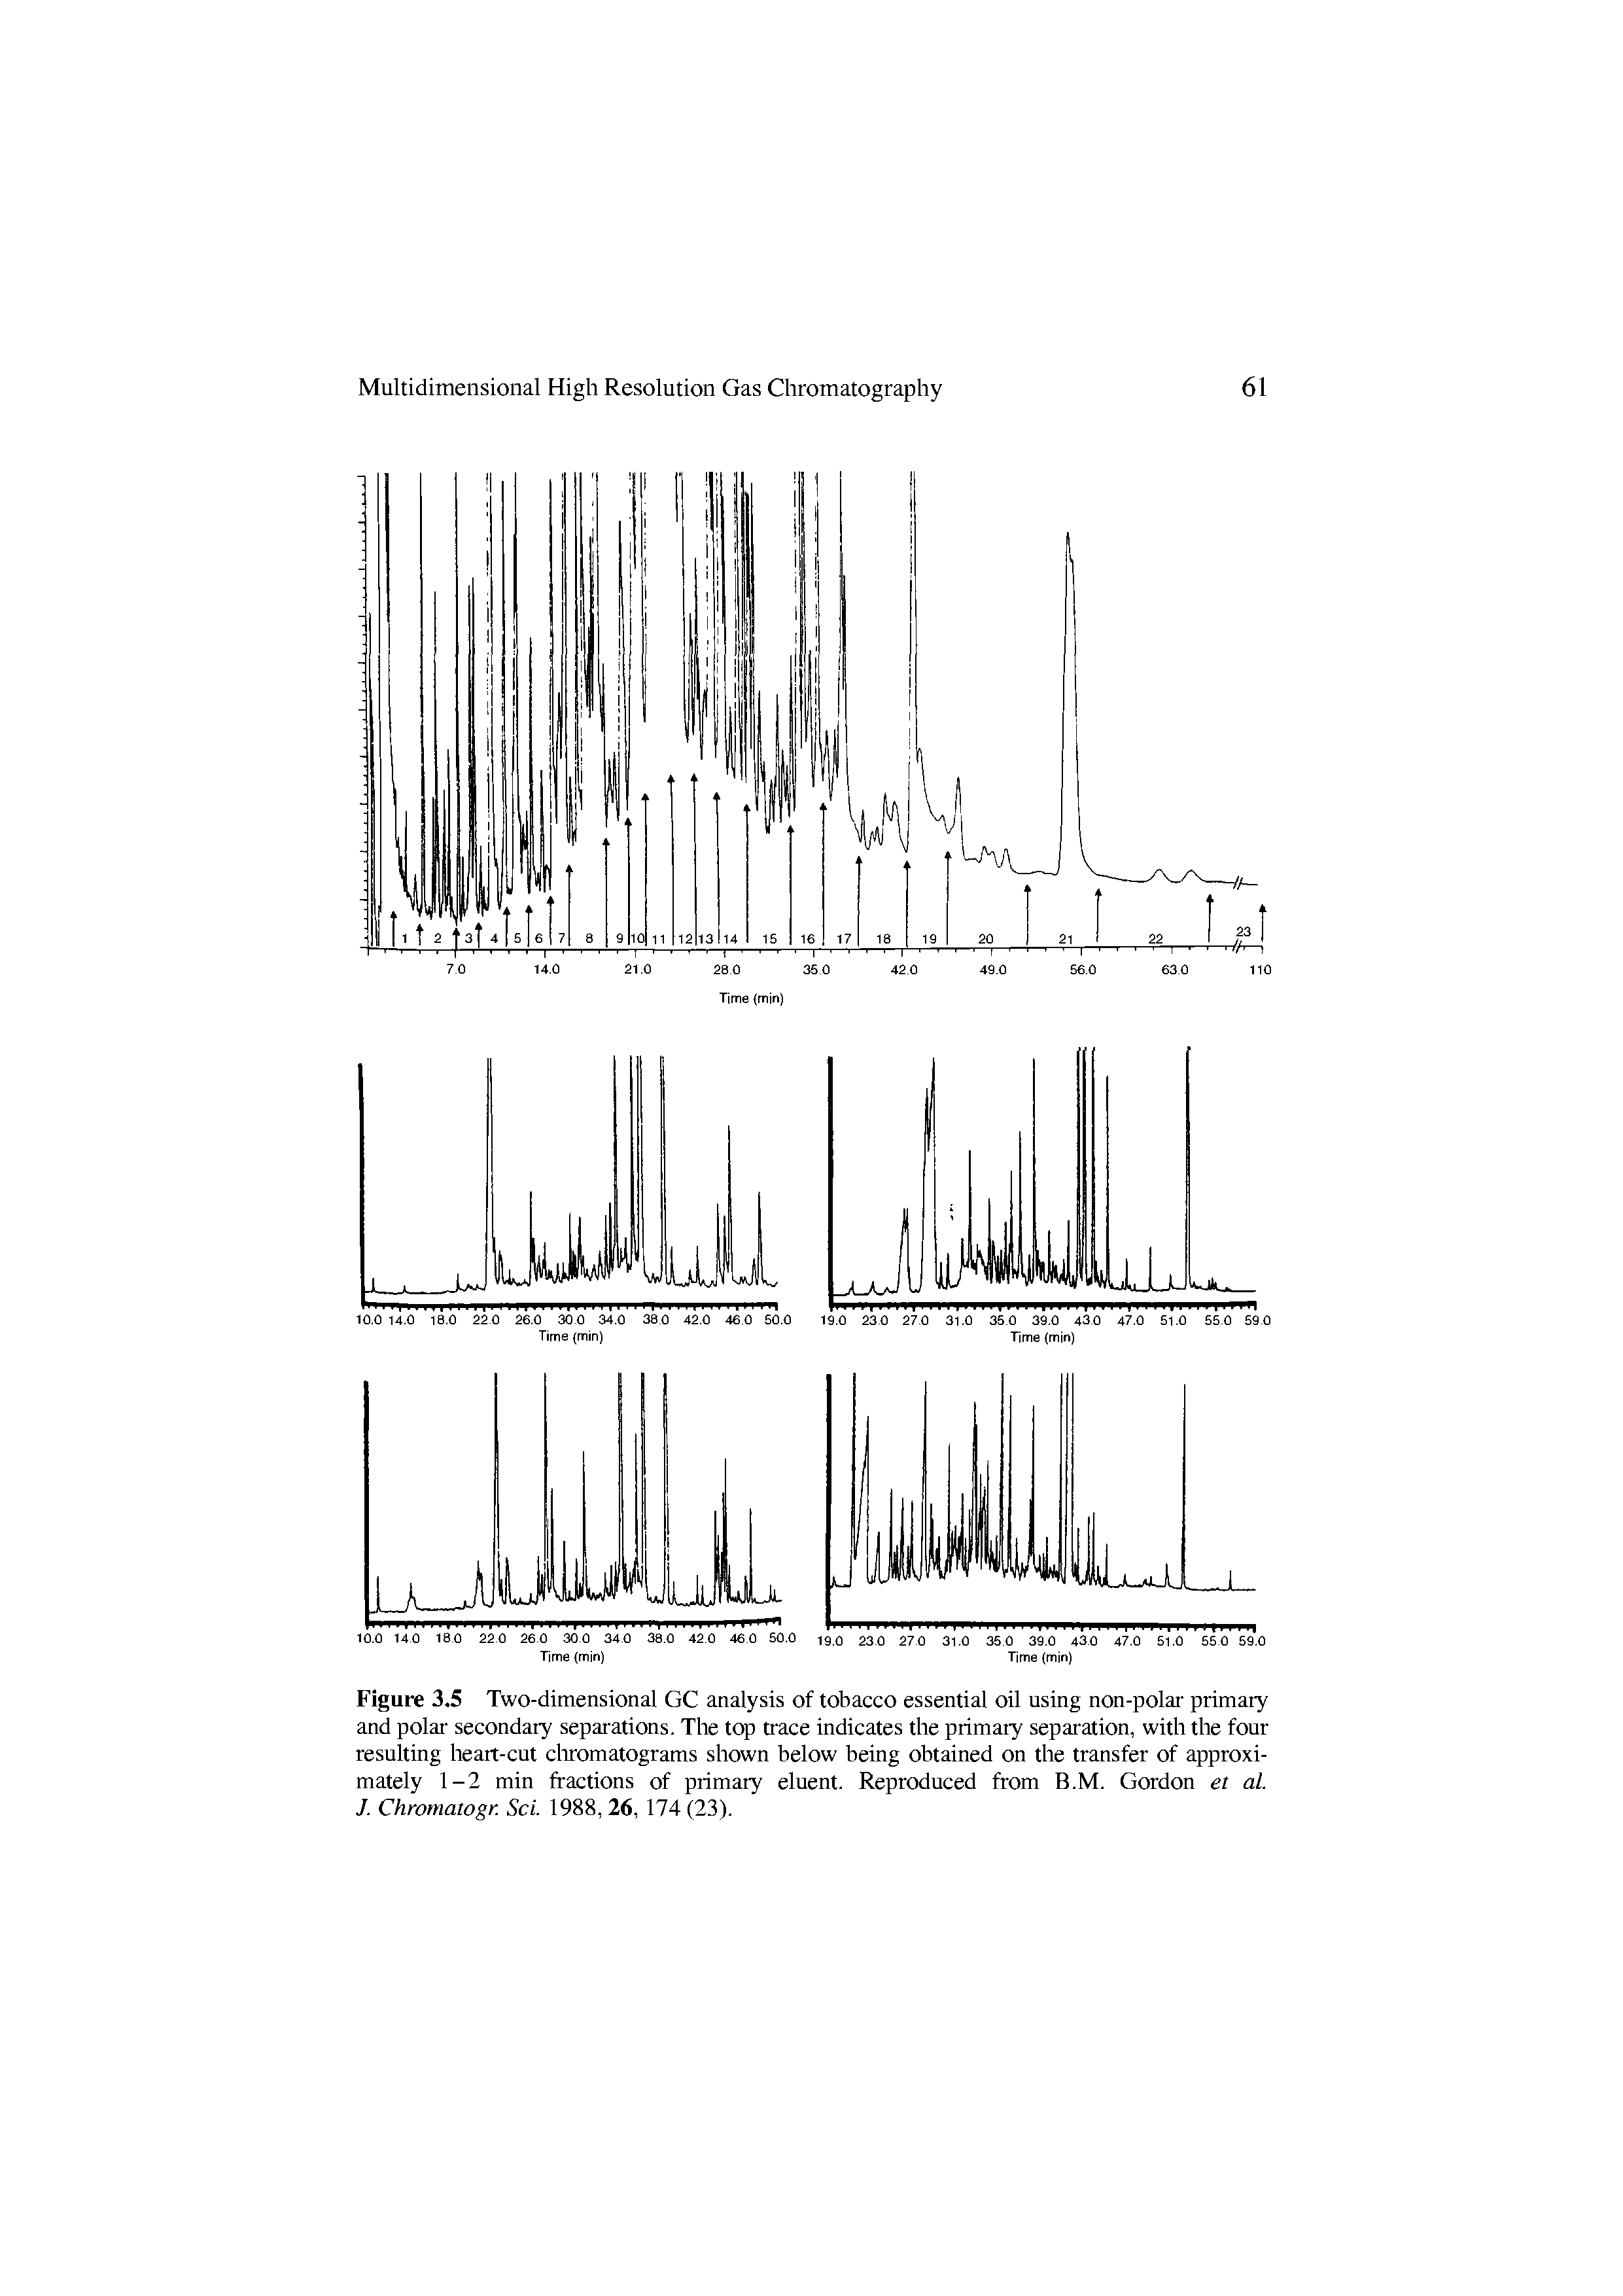 Figure 3.5 Two-dimensional GC analysis of tobacco essential oil using non-polar primary and polar secondary separ-ations. The top tr-ace indicates the primary separ-ation, with the four resulting heart-cut cliromatograms shown below being obtained on the transfer of approximately 1-2 min fractions of primary eluent. Reproduced from B.M. Gordon et al. J. Chwmatogr. Sci. 1988, 26, 174 (23).